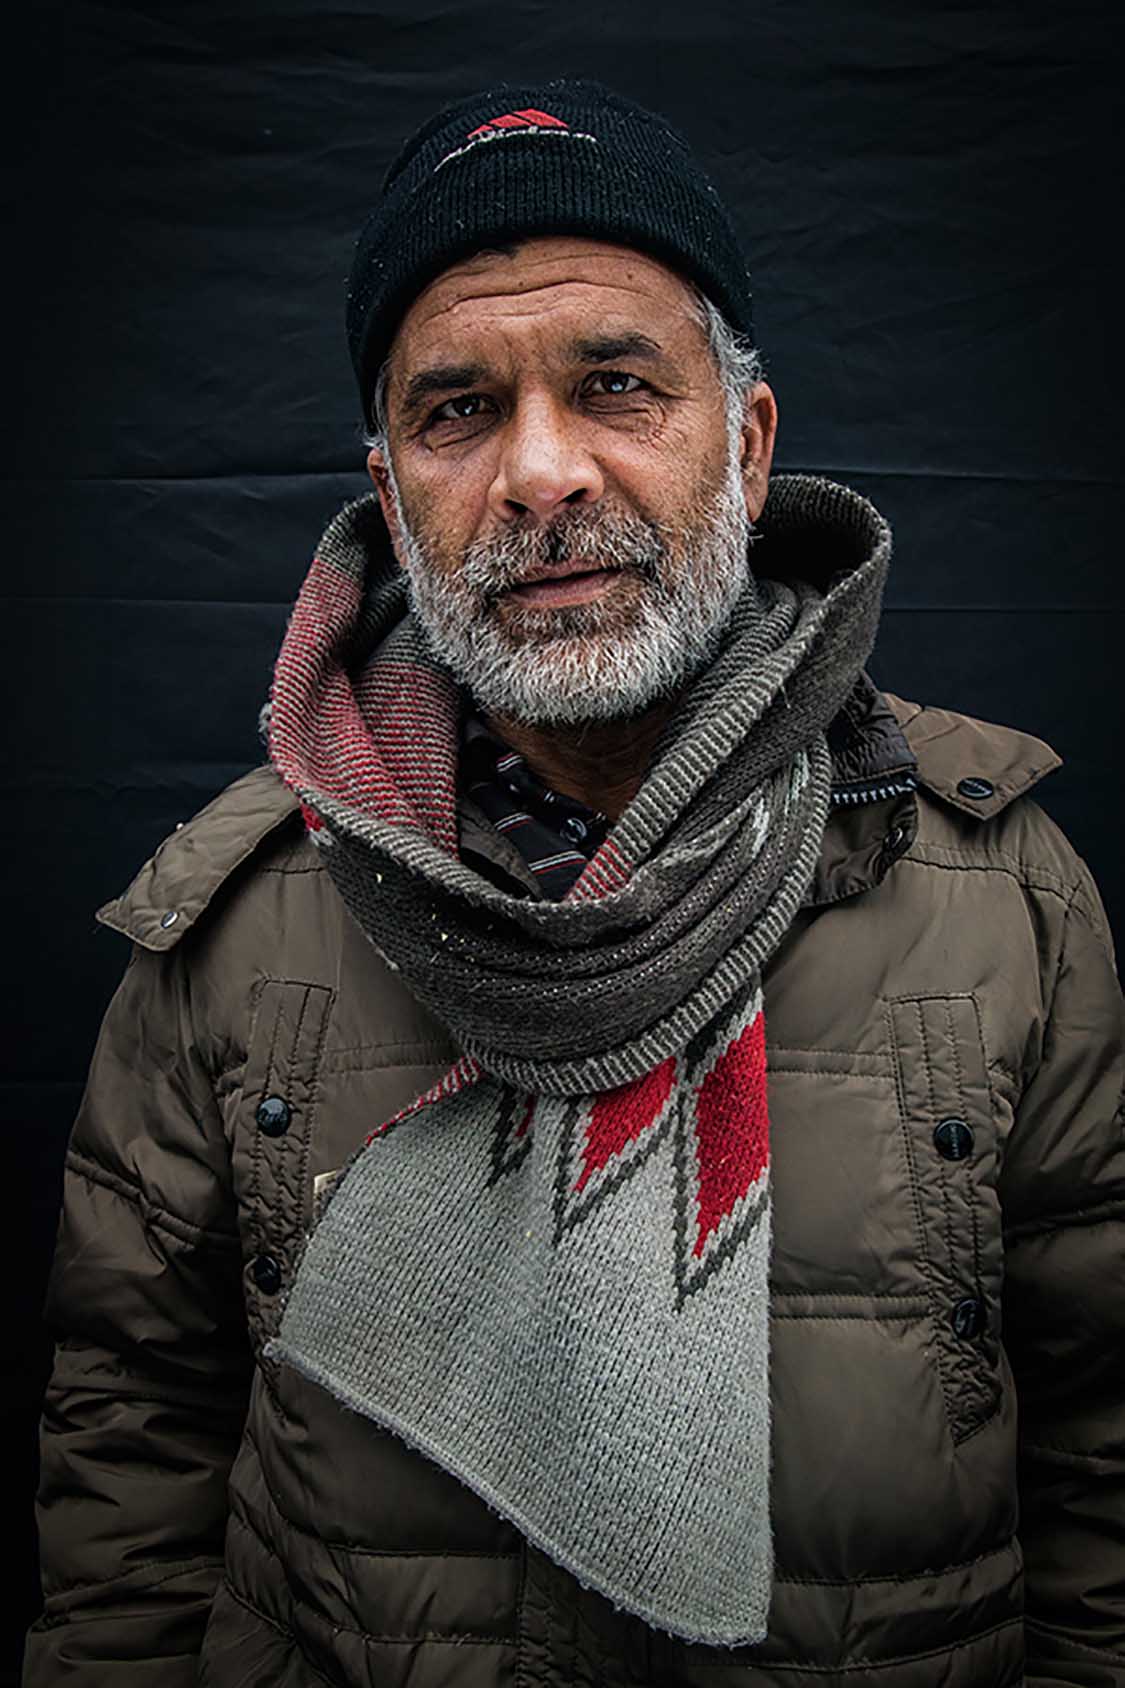  "Just like many others here, I lost count of how many times I tried to cross into Hungary. 

But I will keep trying. 

My destiny is not here in Serbia."

Jan, 65, Afghanistan.  